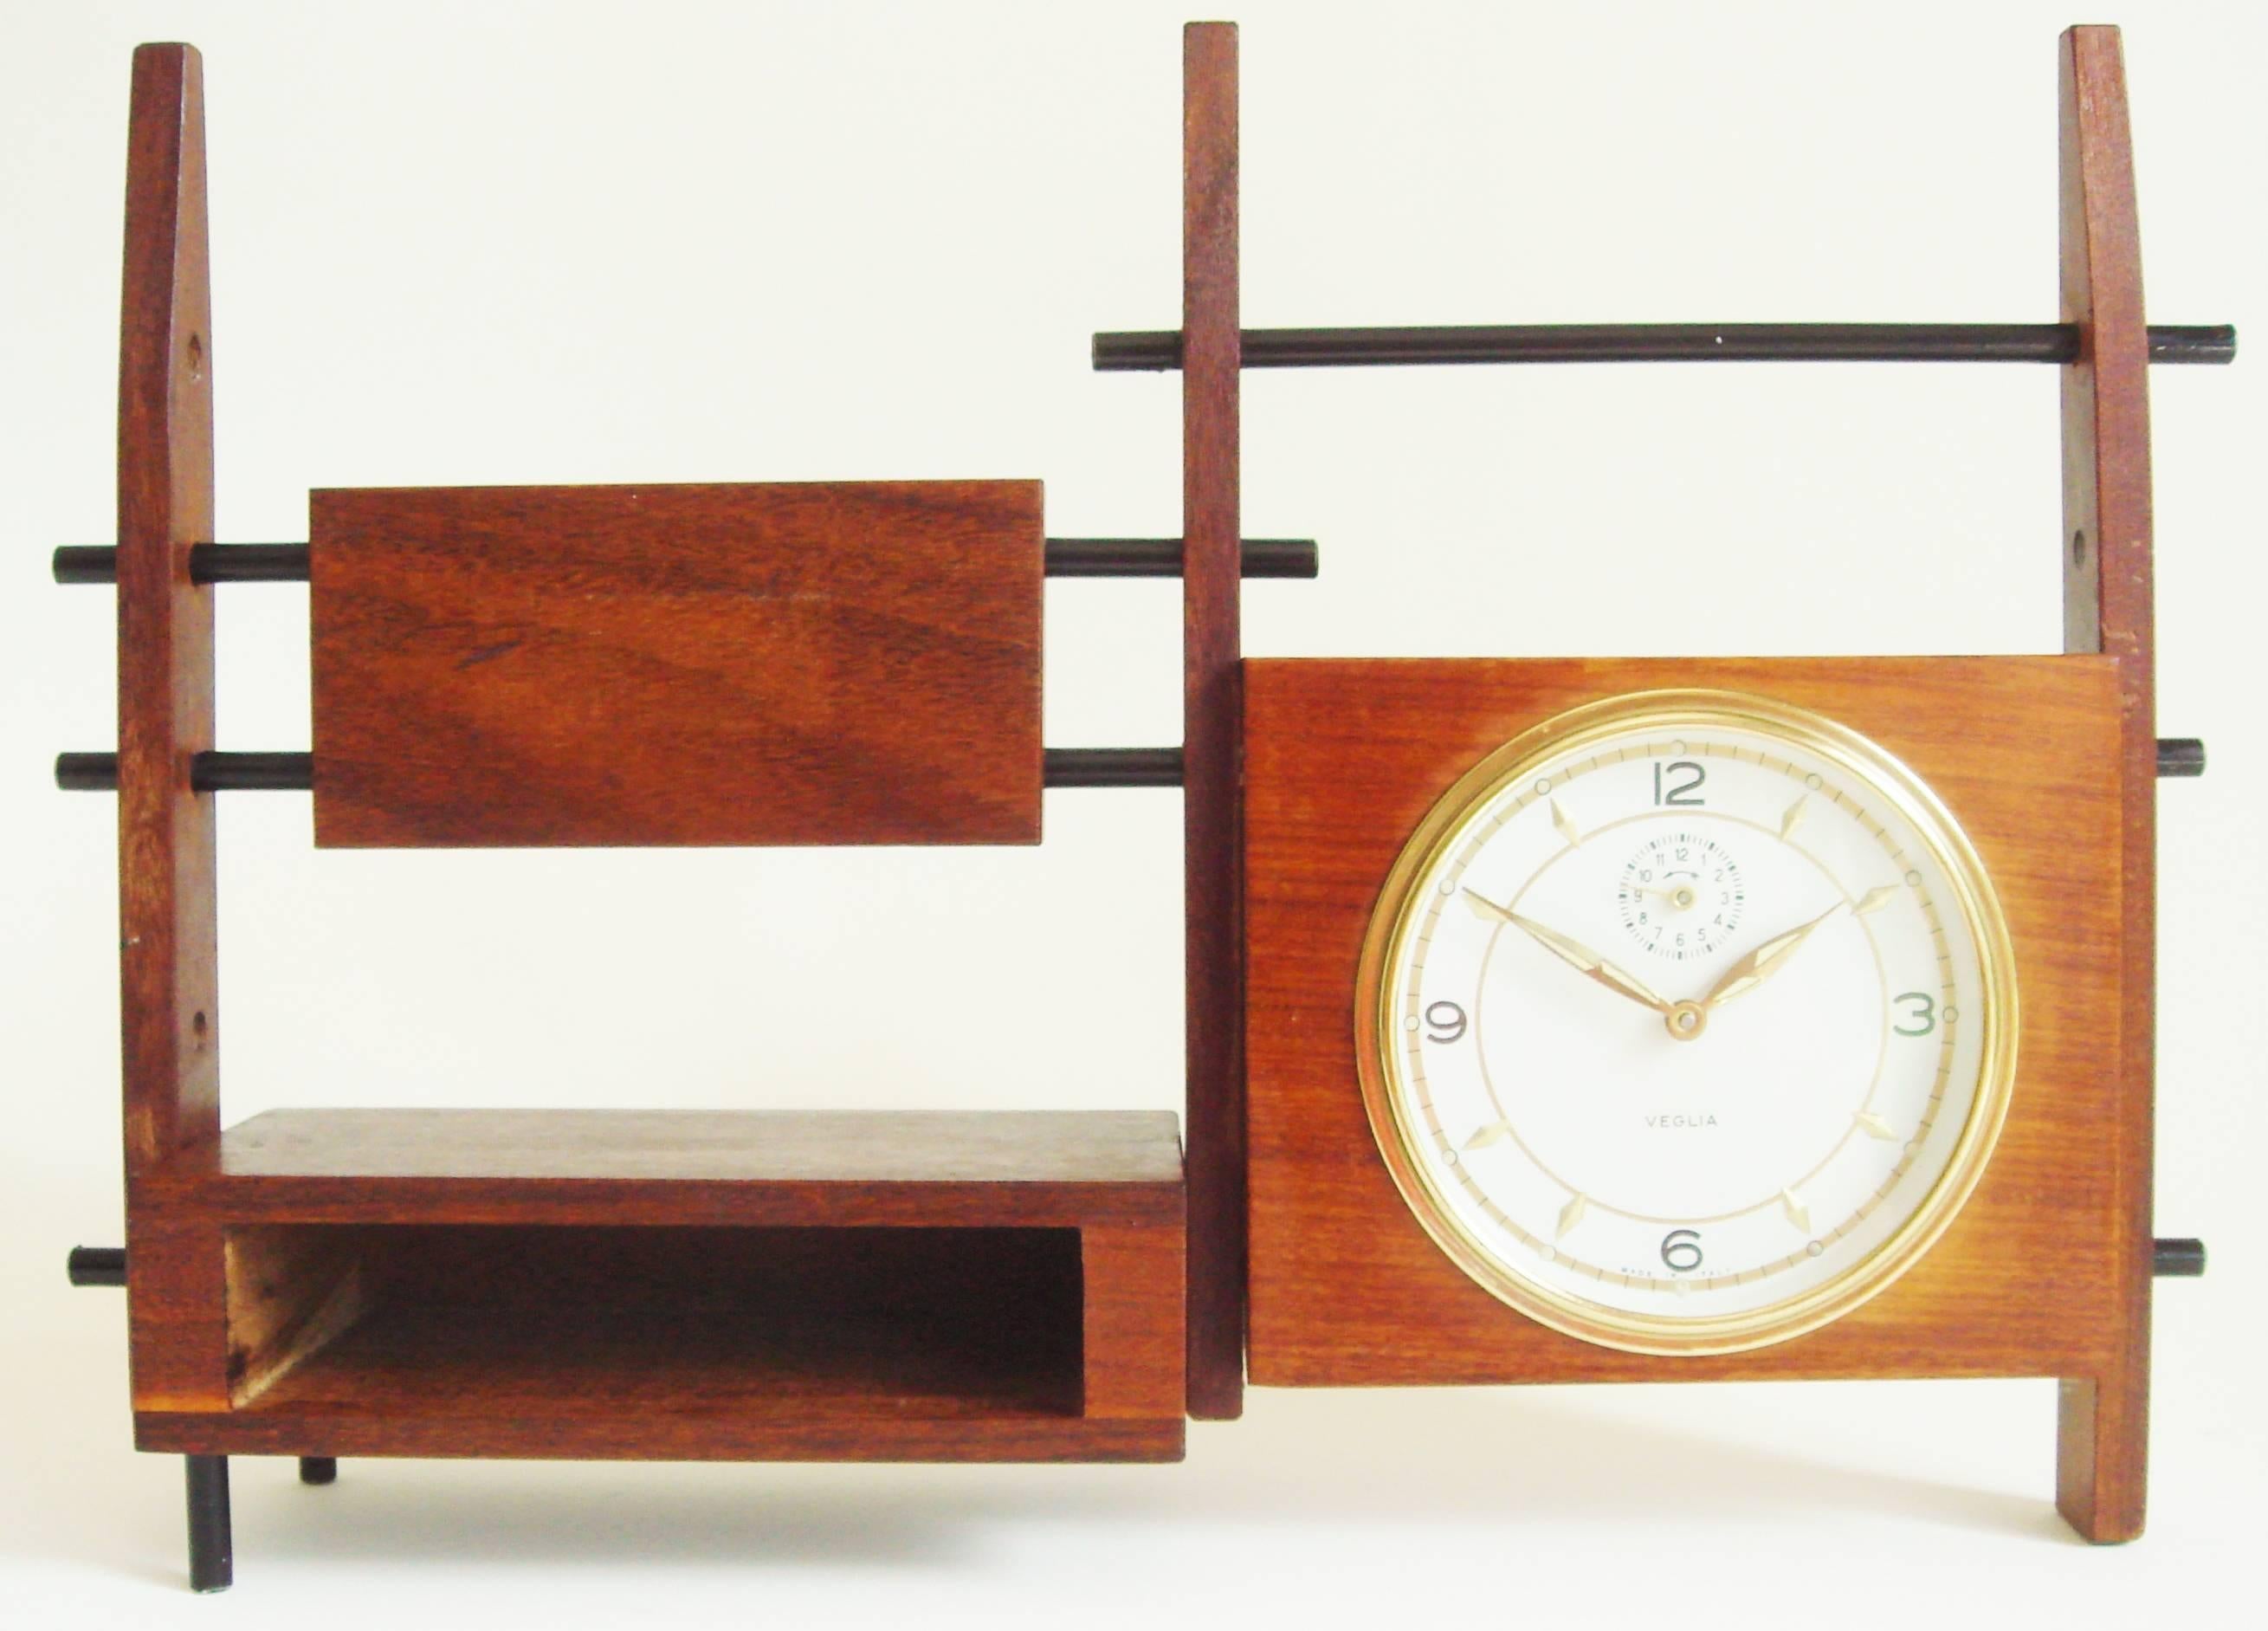 This beautifully executed Italian Mid-Century Modern Veglia mechanical alarm clock takes the form of a miniature wall unit and its design plays off the contrasting surfaces of teak and rosewood. Three tapering vertical posts support a rosewood